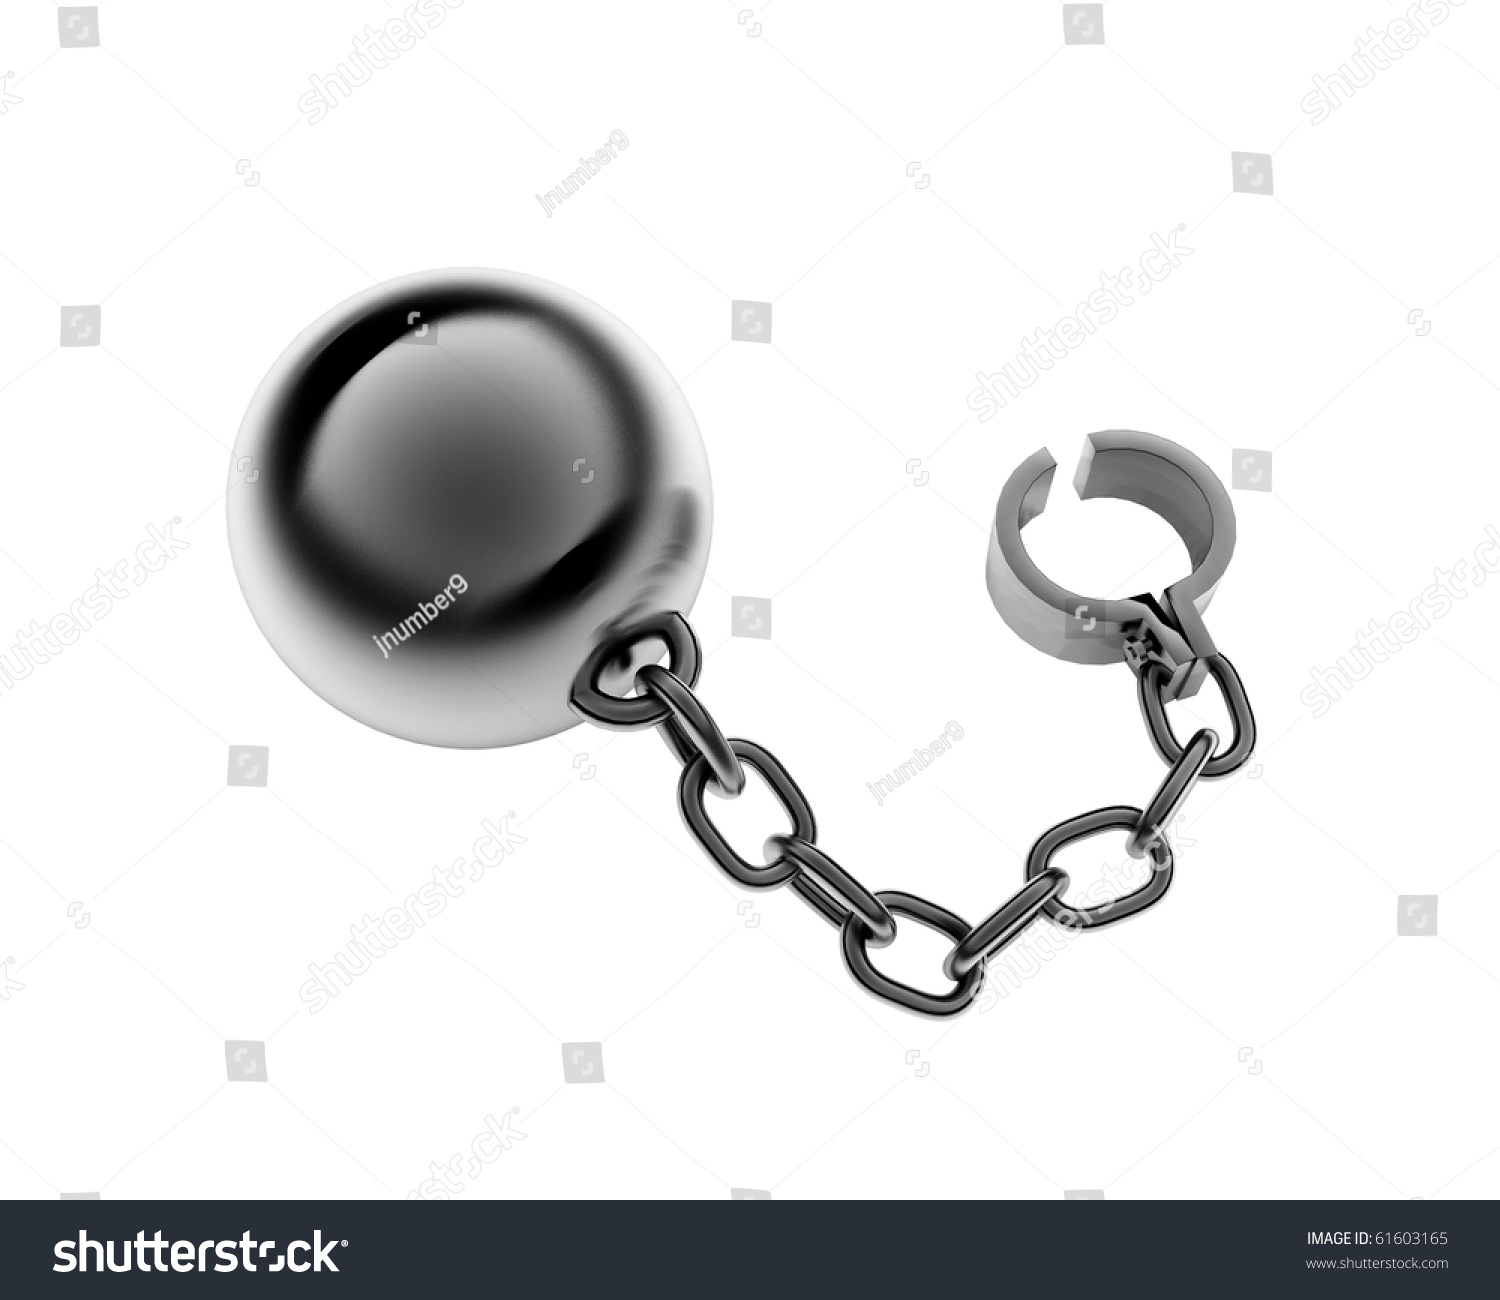 Shackles Isolated Stock Photo 61603165 : Shutterstock